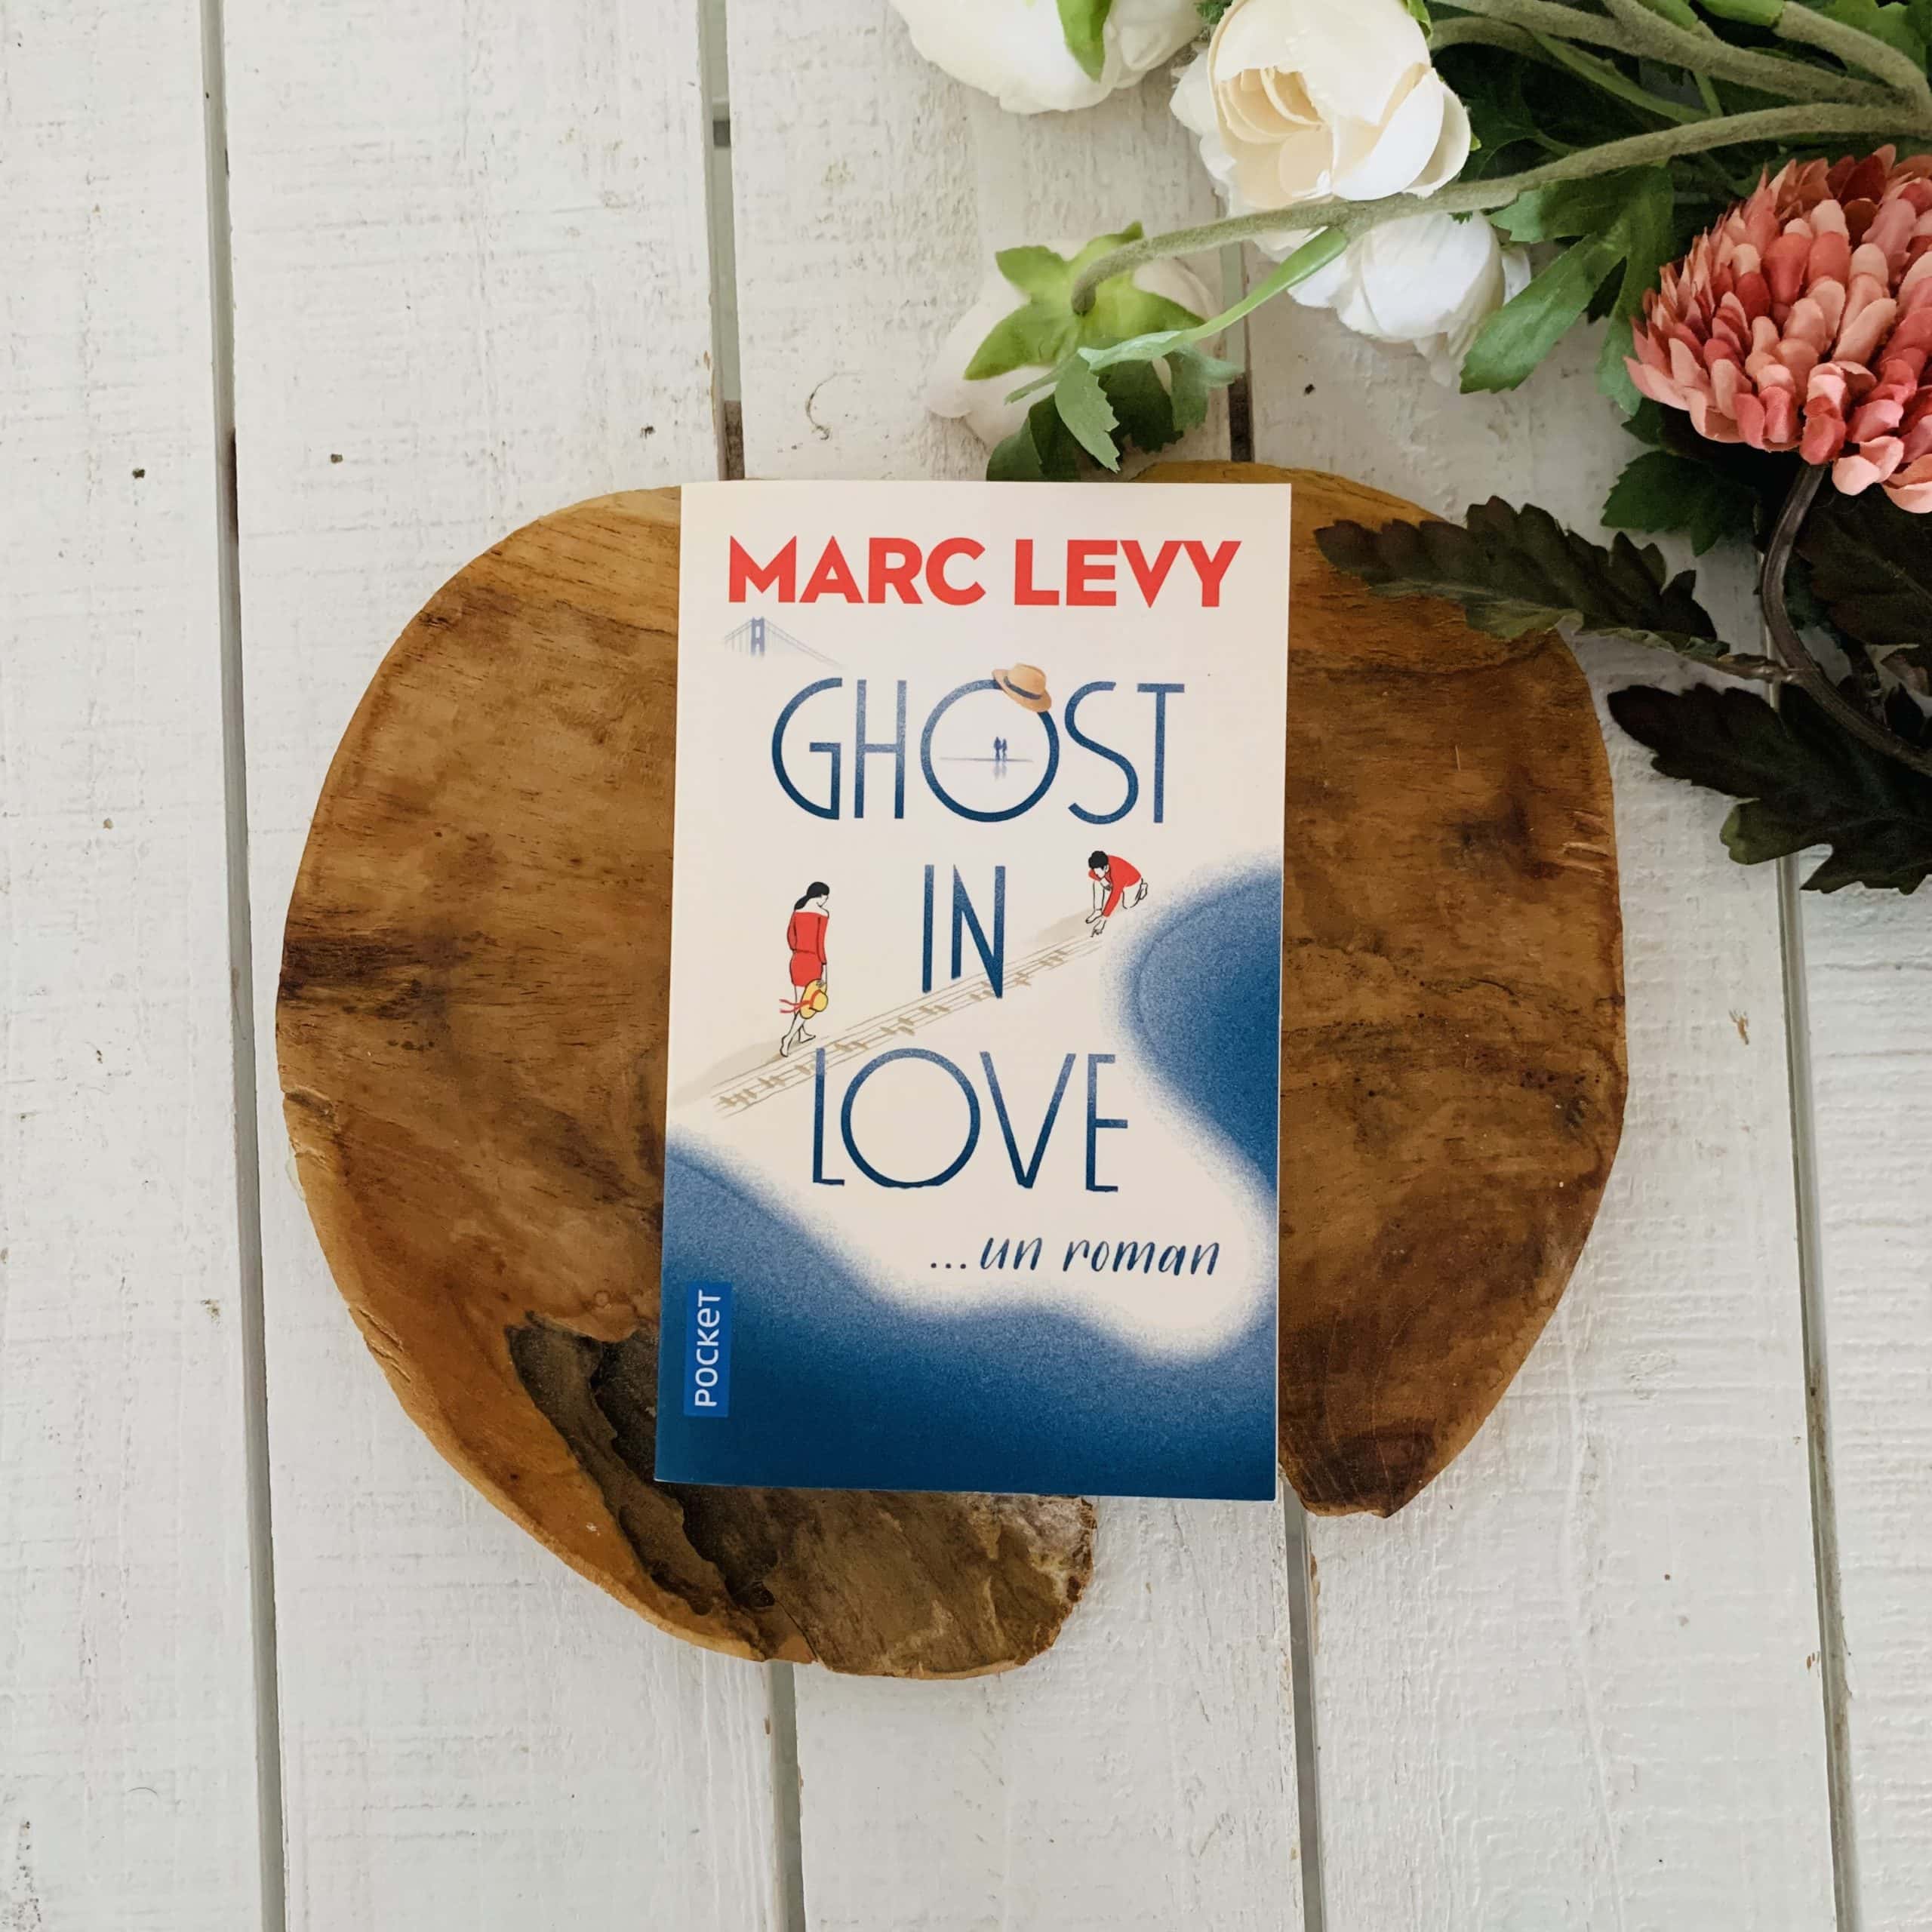 Ghost in love - Marc Levy